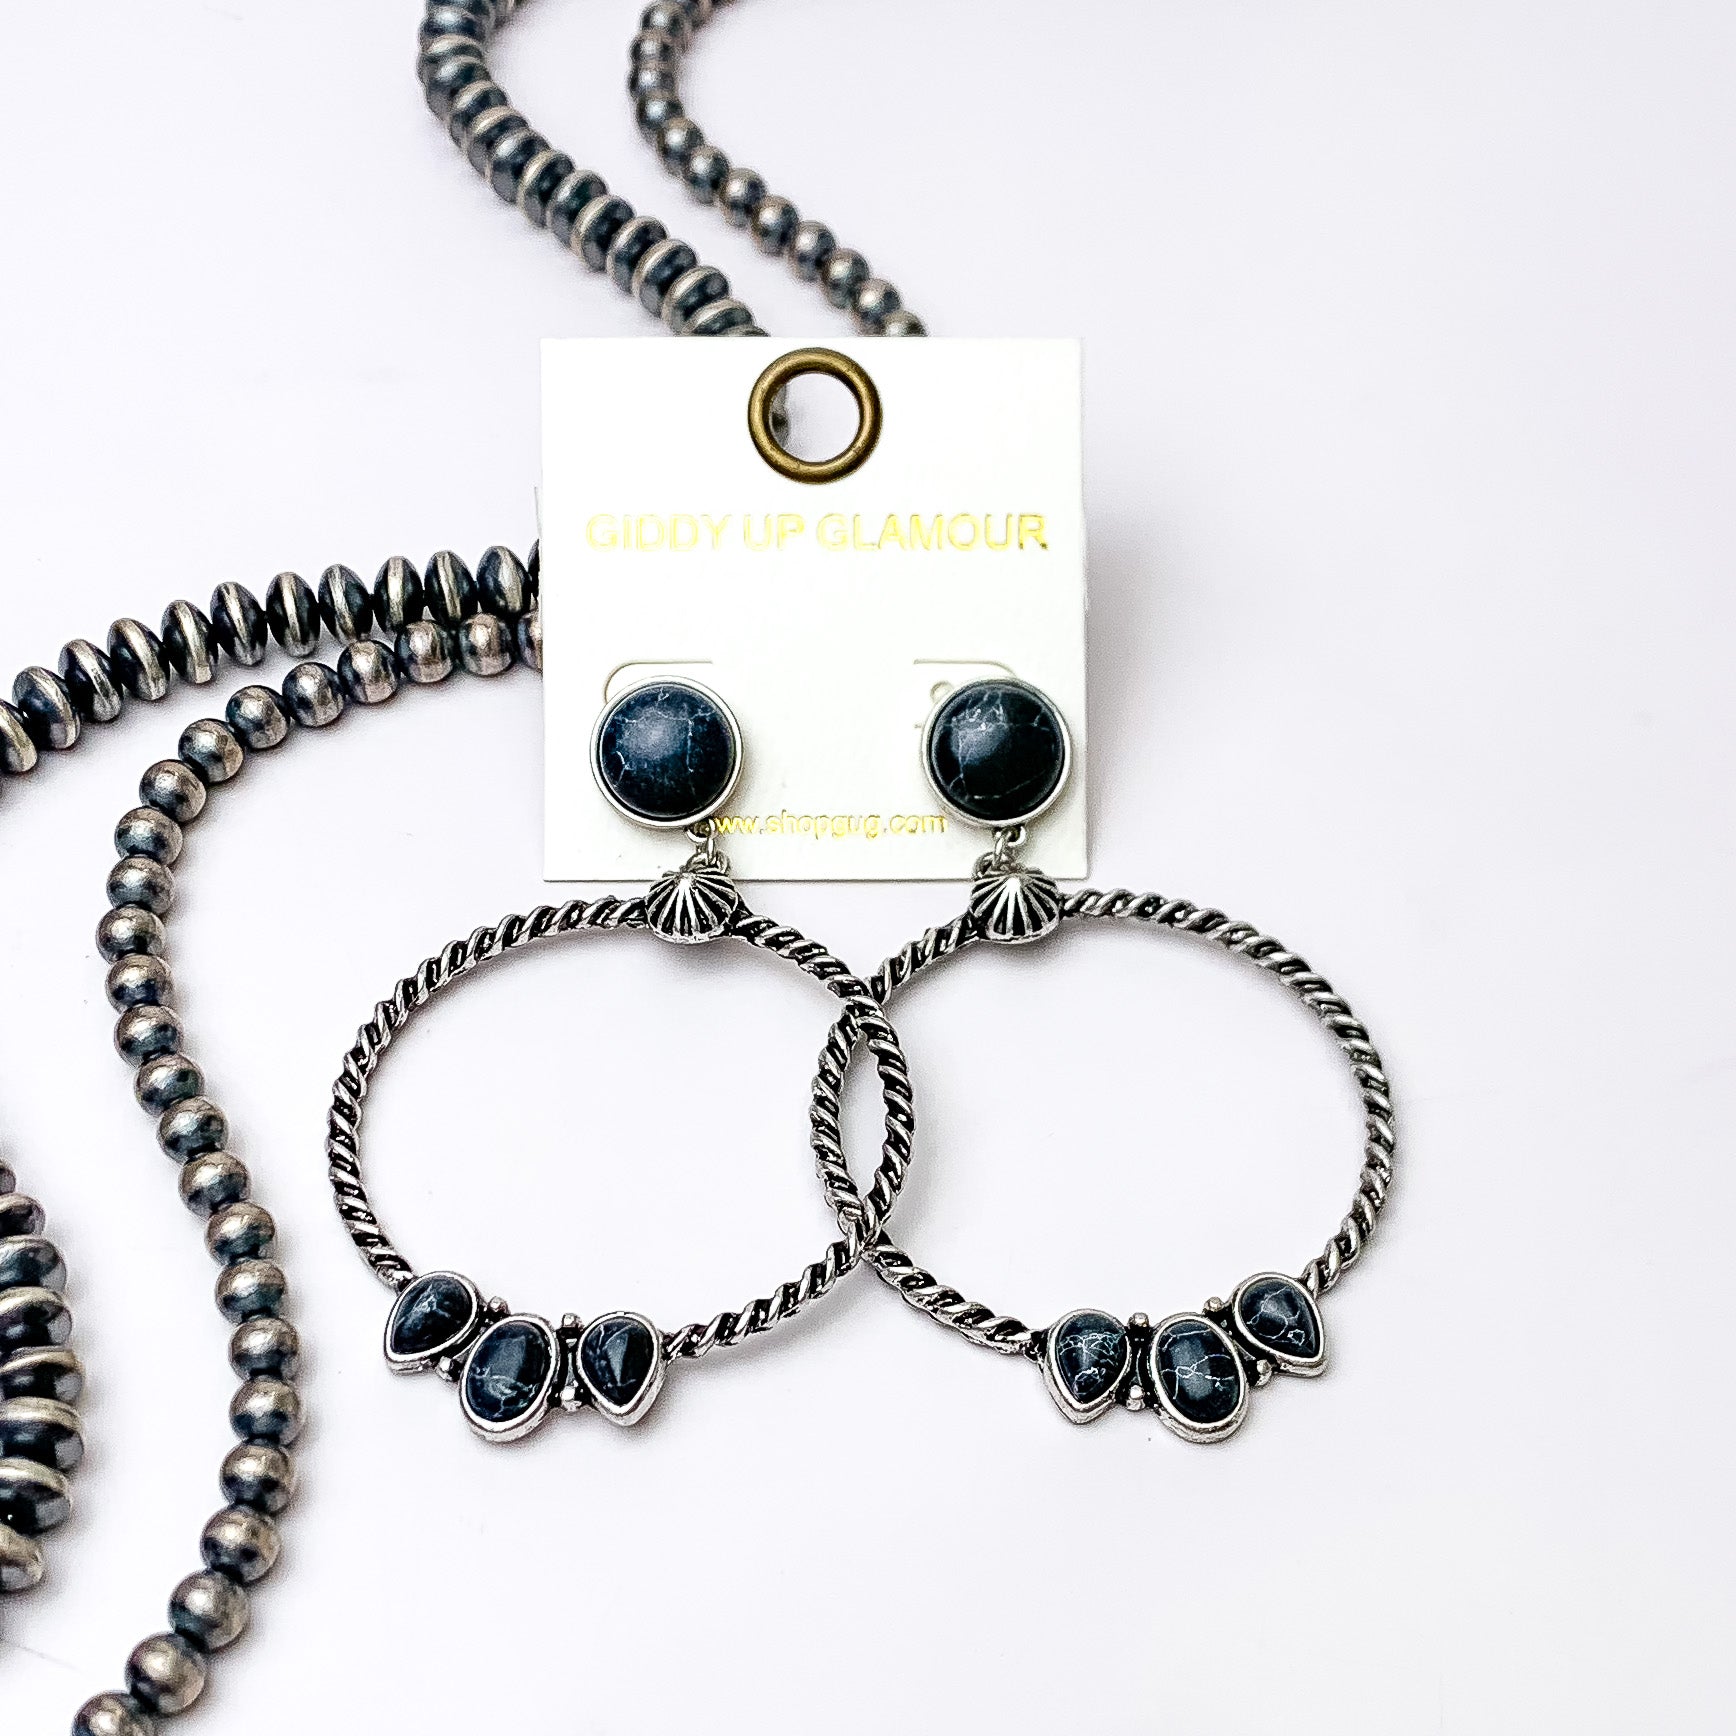 Circle, black stone post earrings with a silver circle drop pendant. At the bottom of the circle there are three different shaped stones in black. These earrings are pictured on a white background with silver beads on the left side bottom of the picture. 